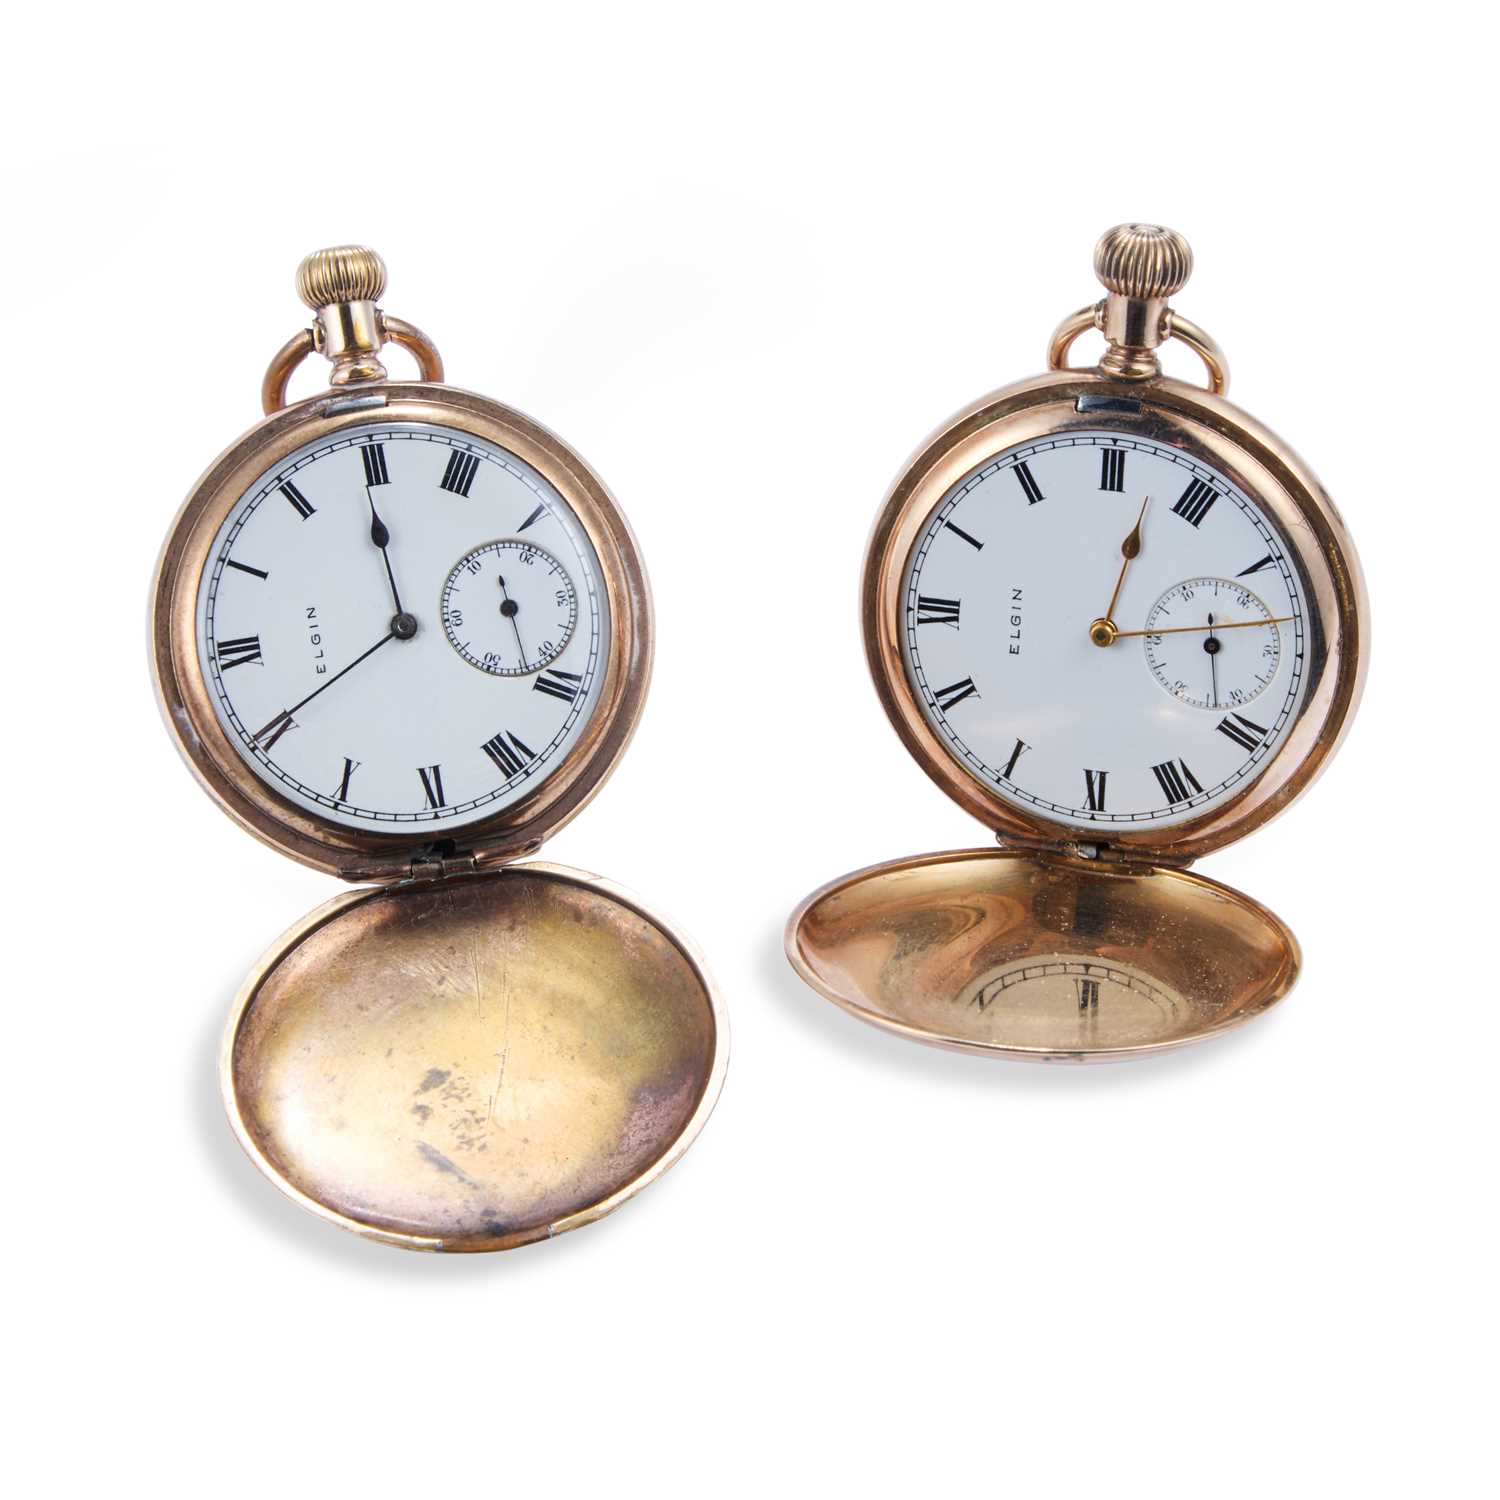 TWO ELGIN GOLD PLATED FULL HUNTER POCKET WATCHES